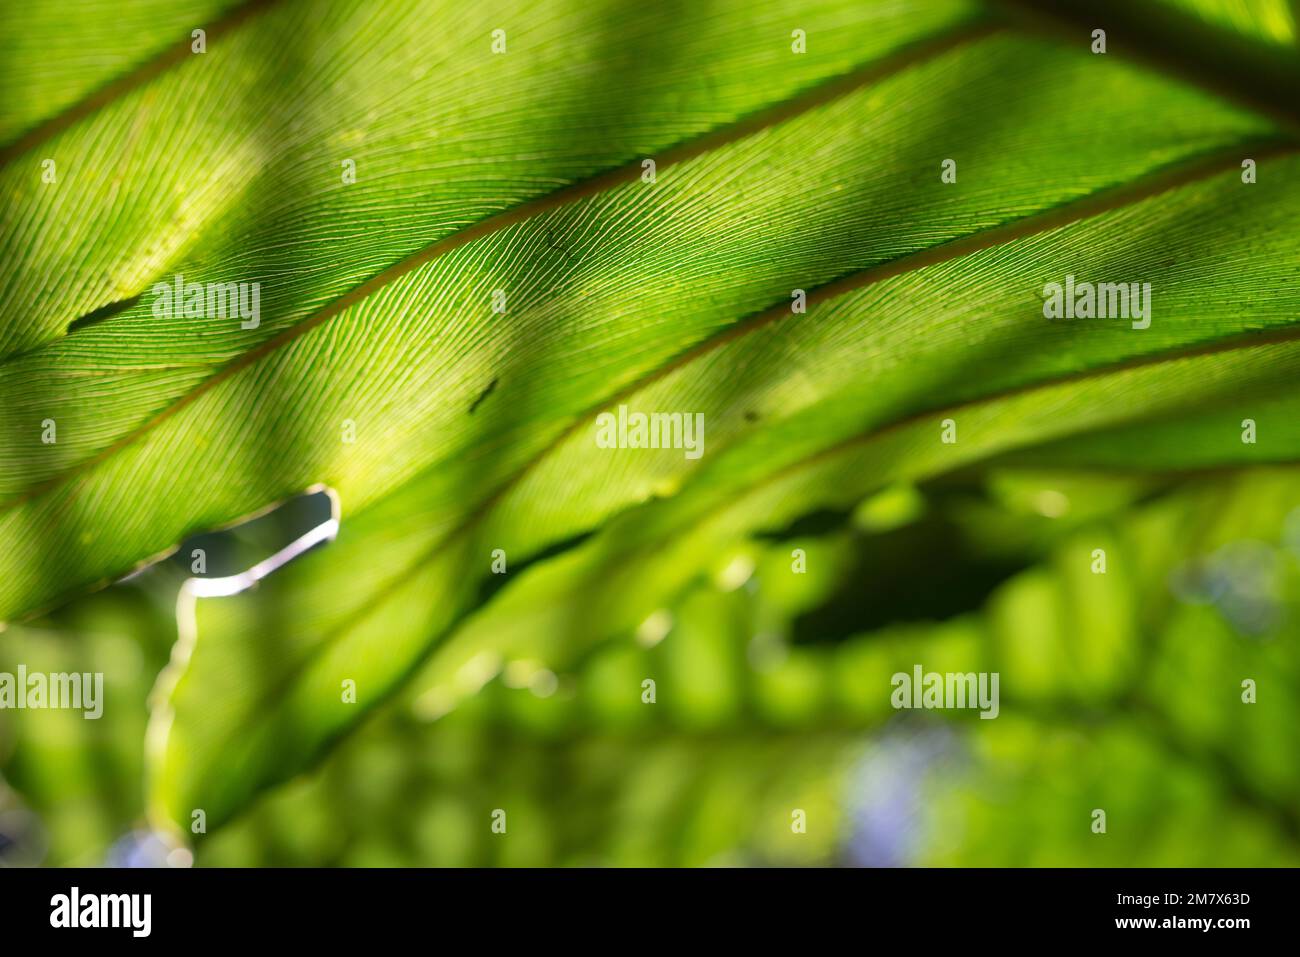 Abstract green background. Philodendron speciosum or arrowhead philodendron leaf Stock Photo